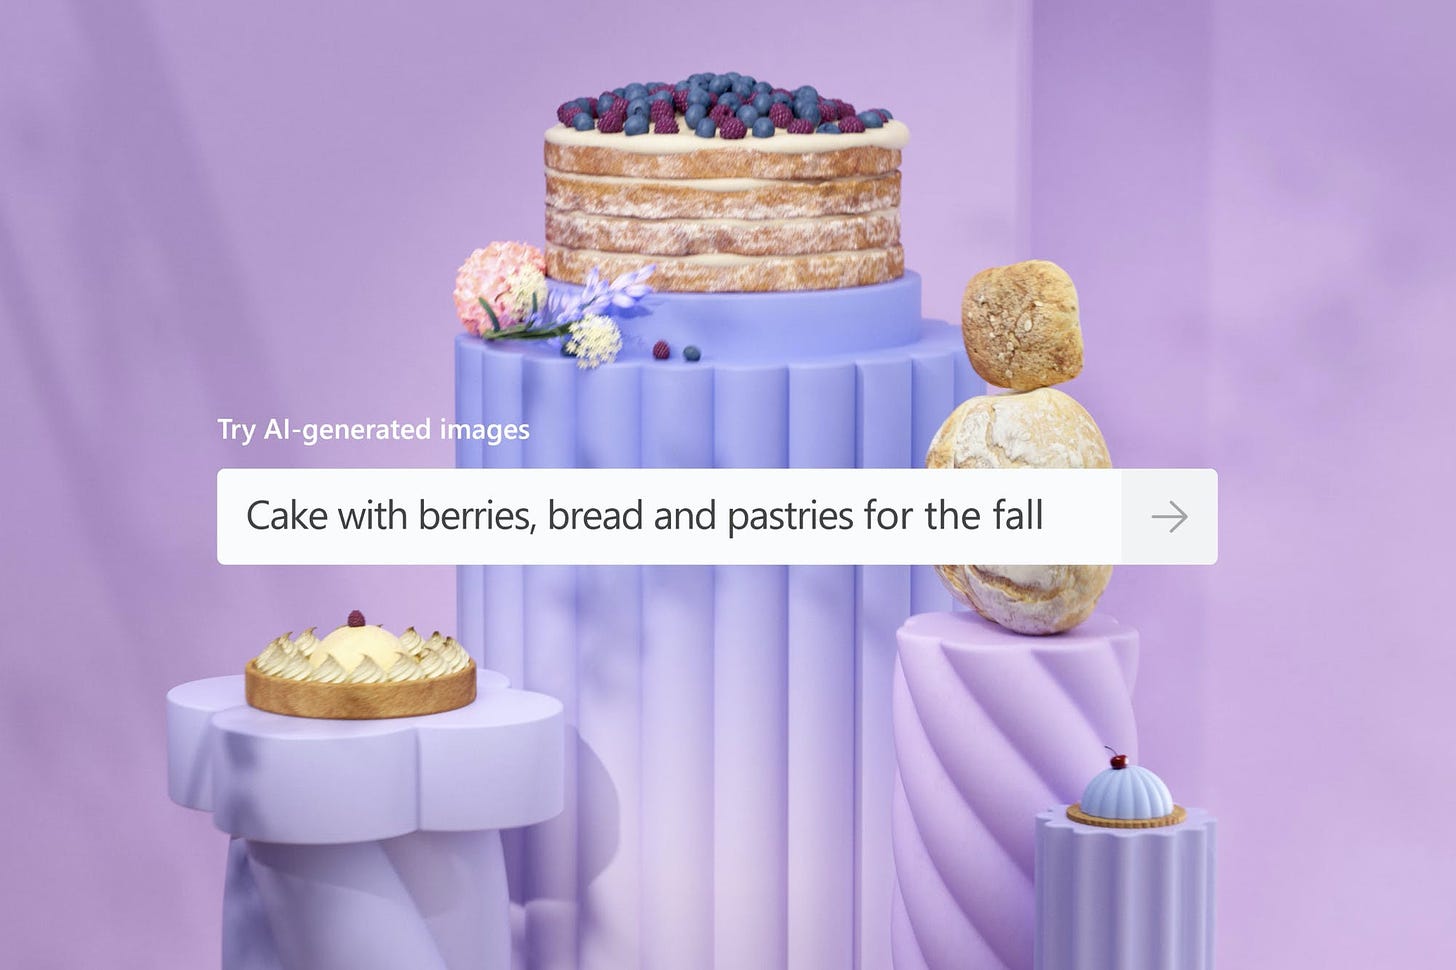 A screenshot showing a textbox with the prompt “Try AI-generate images” and the entry “Cake with berries, bread and pastries for the fall.”